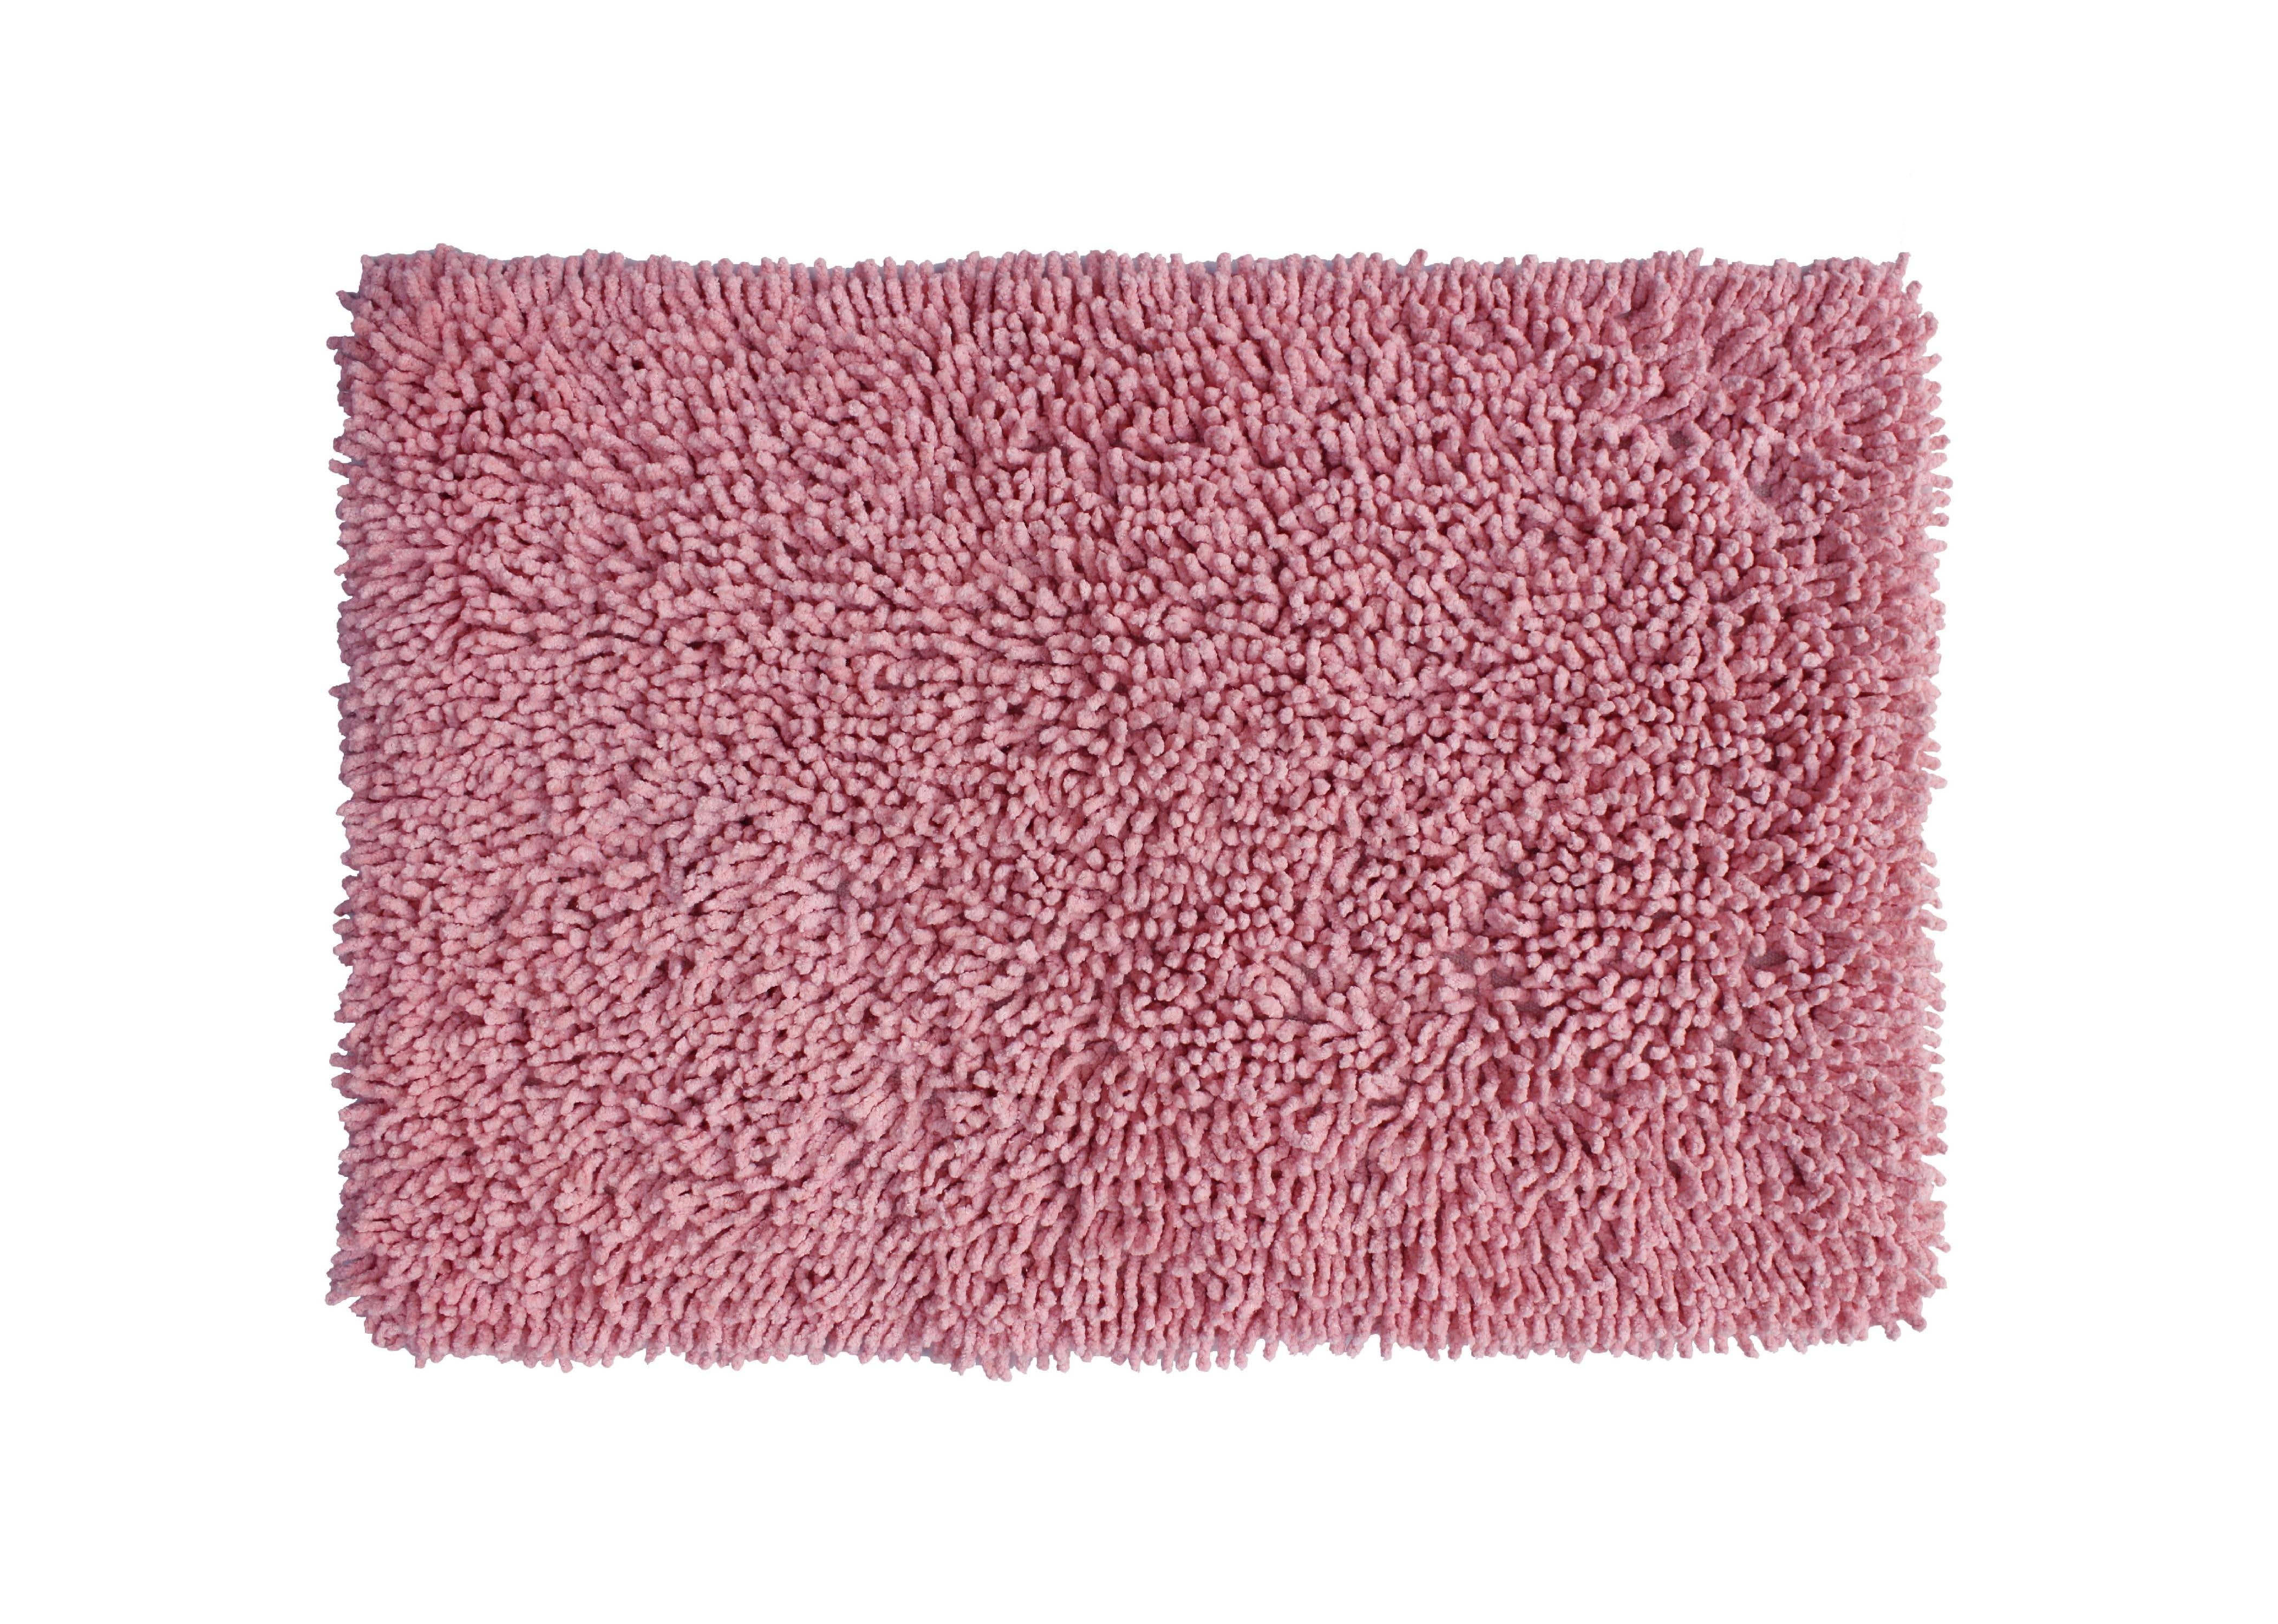 Photo 1 of Home Weavers Fantasia Collection - Absorbent Cotton Soft Bathroom, Machine Wash Dry, 17x24, Pink